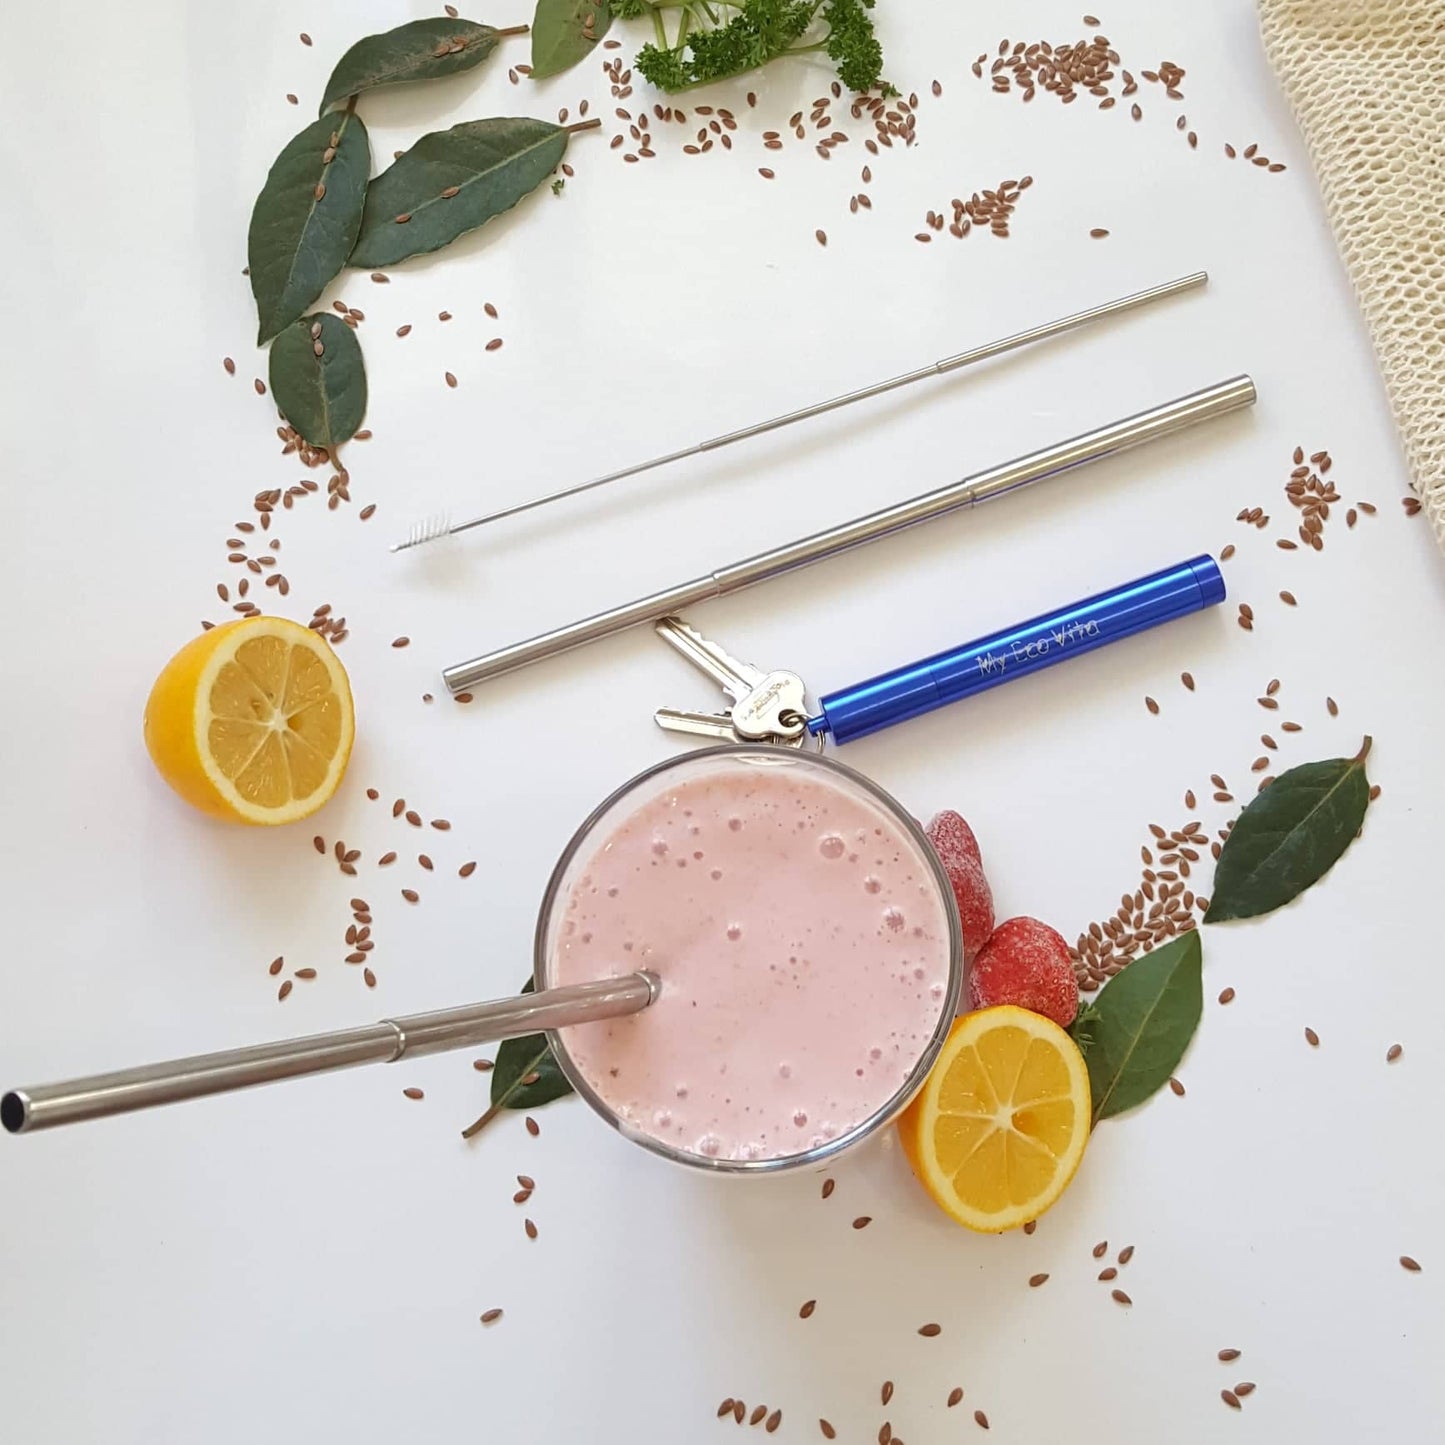 Reusable metal straws that can be used as a keychain. A completely collapsable straw that comes in a metal case with a cleaning brush. Avoid single use straws, use reusable straws